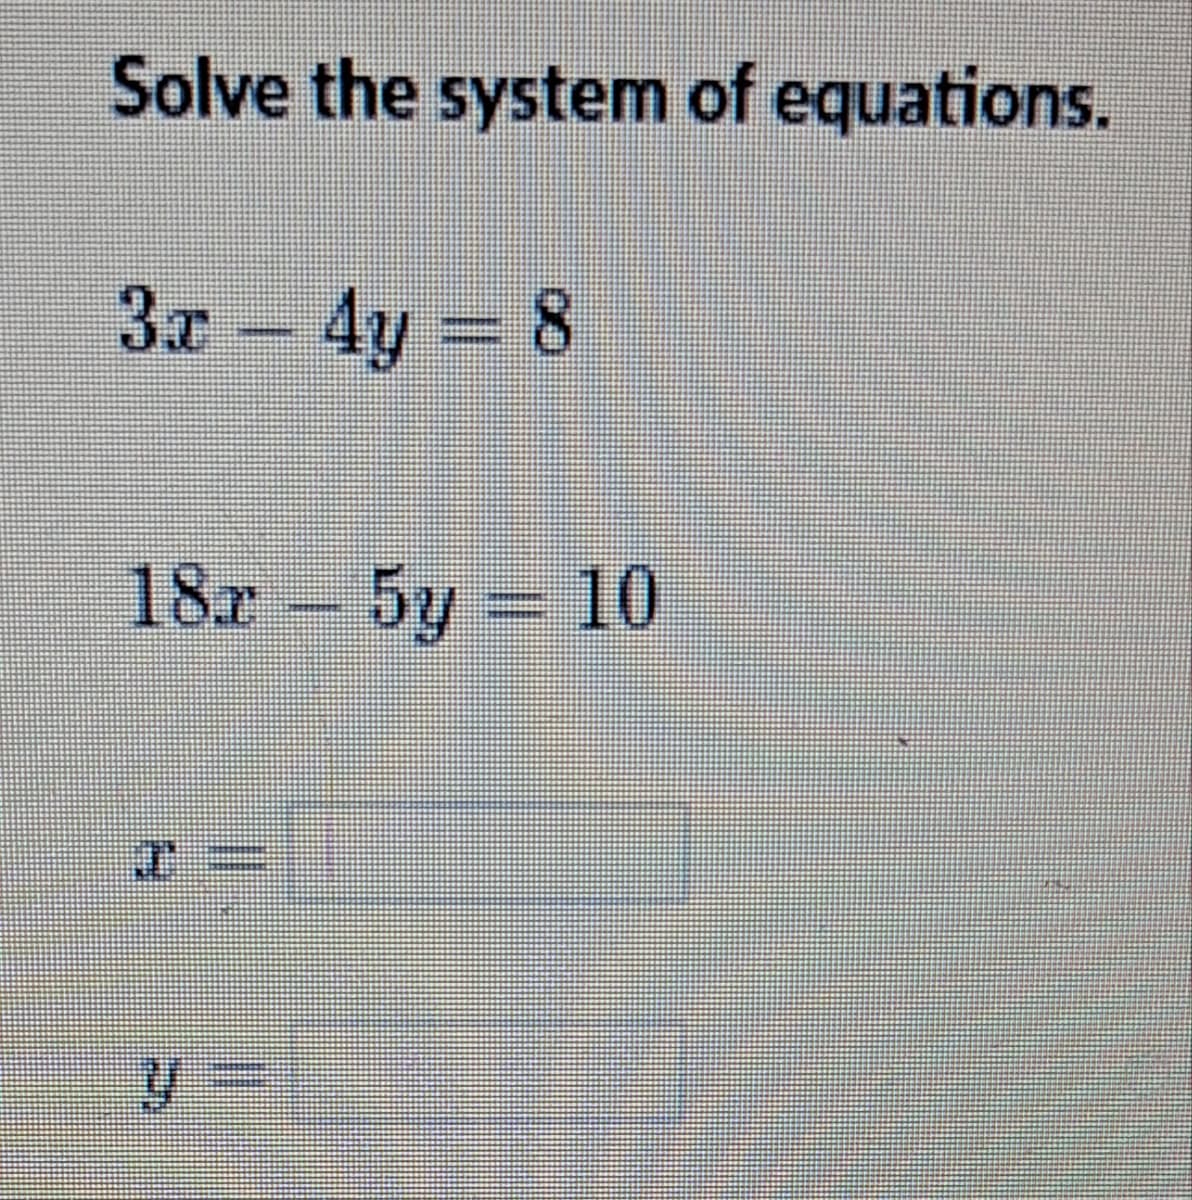 Solve the system of equations.
3x - 4y = 8
18x5y = 10
J
y